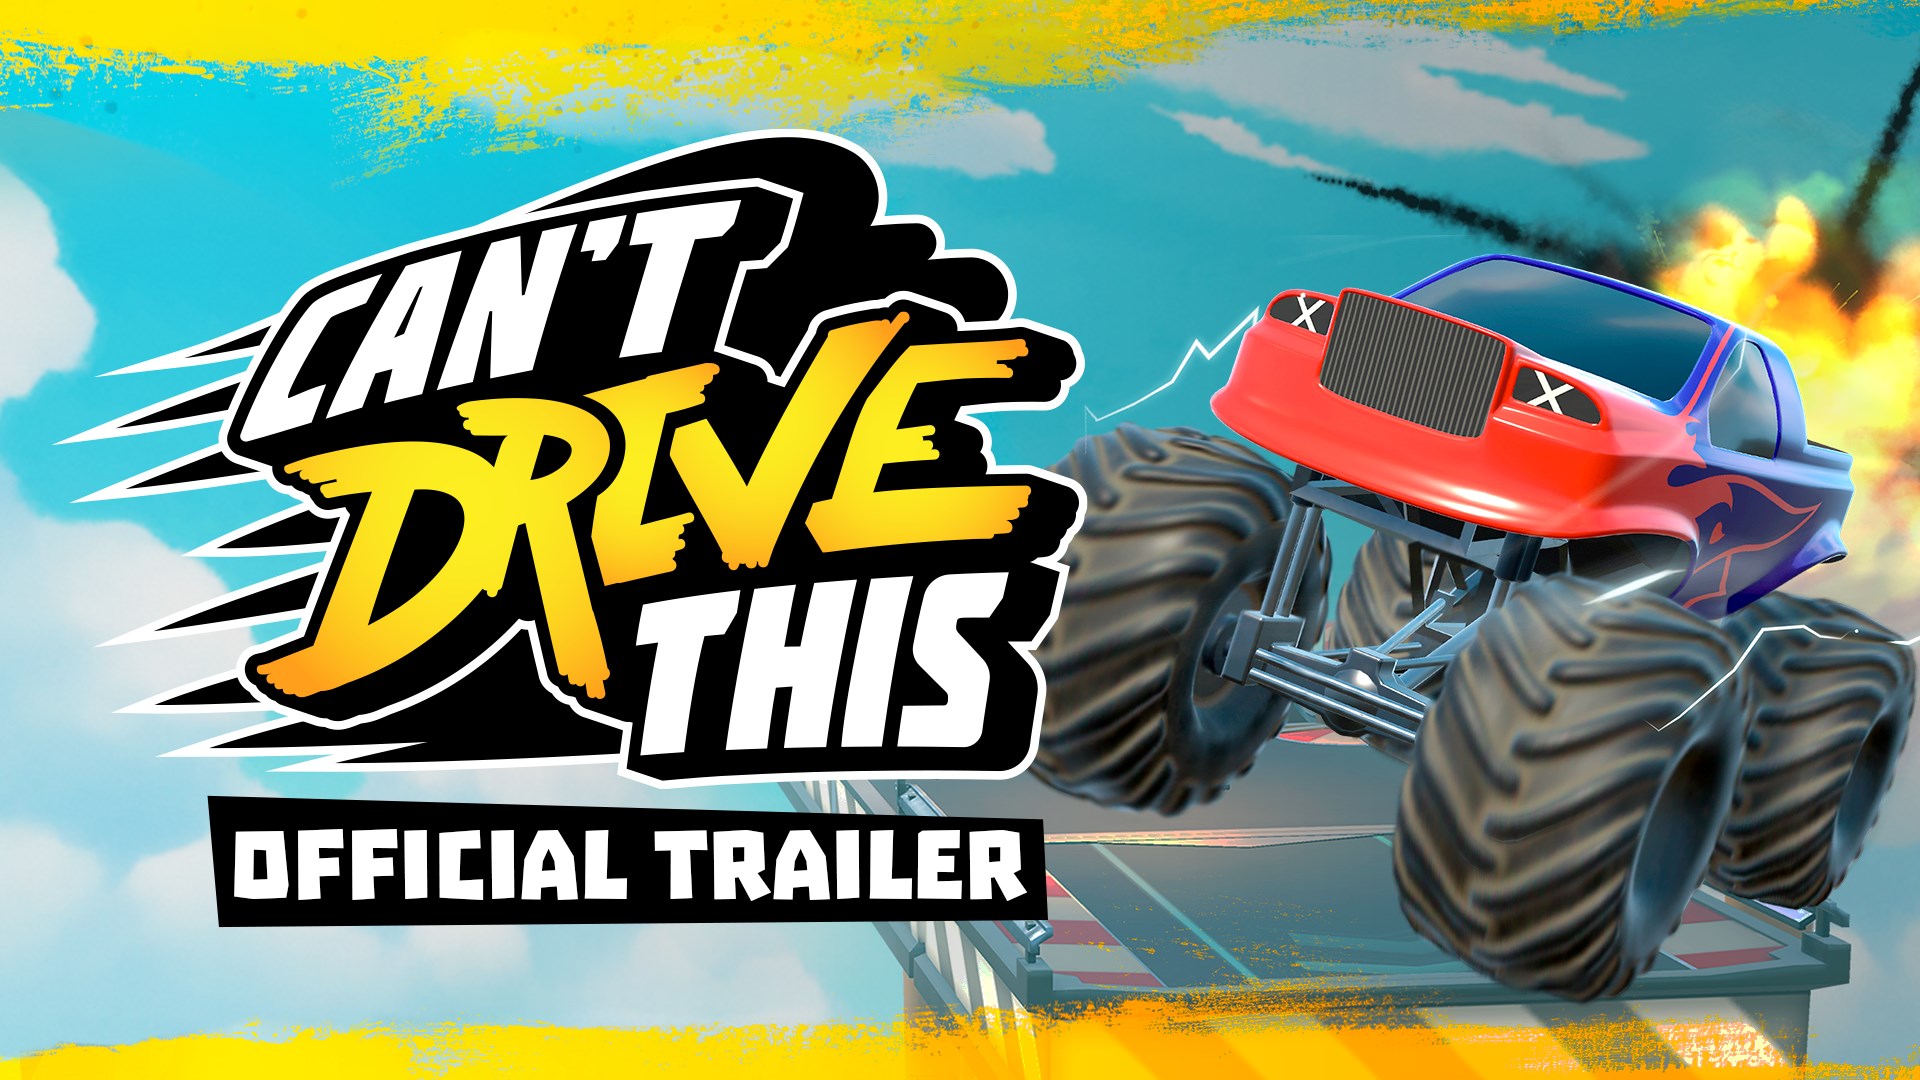 Video For Can’t Drive This Is Now Available For Xbox One And Xbox Series X|S